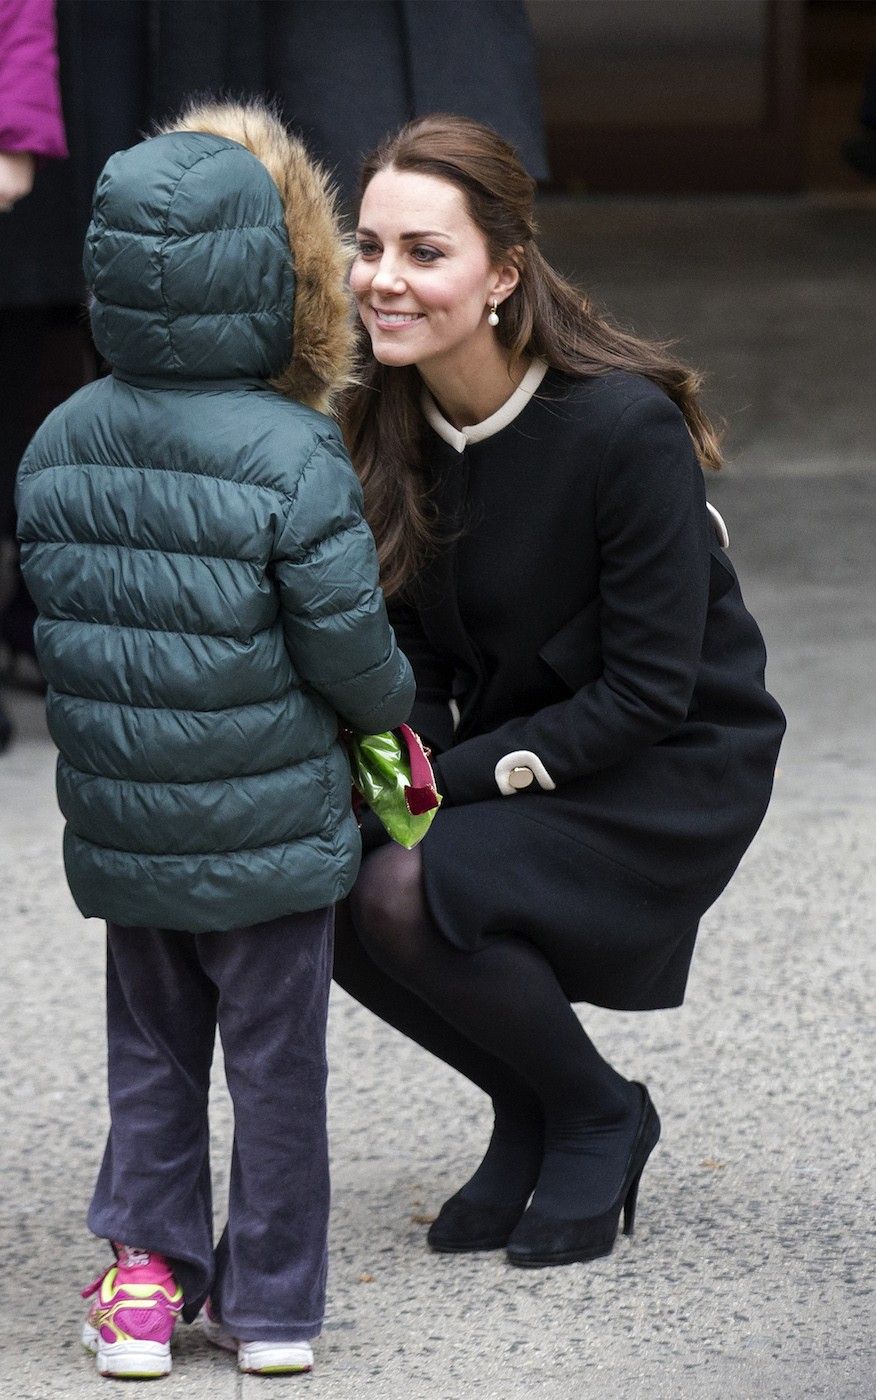 Britains Catherine, Duchess of Cambridge is greeted by a child after an event at the Northside Center for Child Development in the Harlem section of New York, 